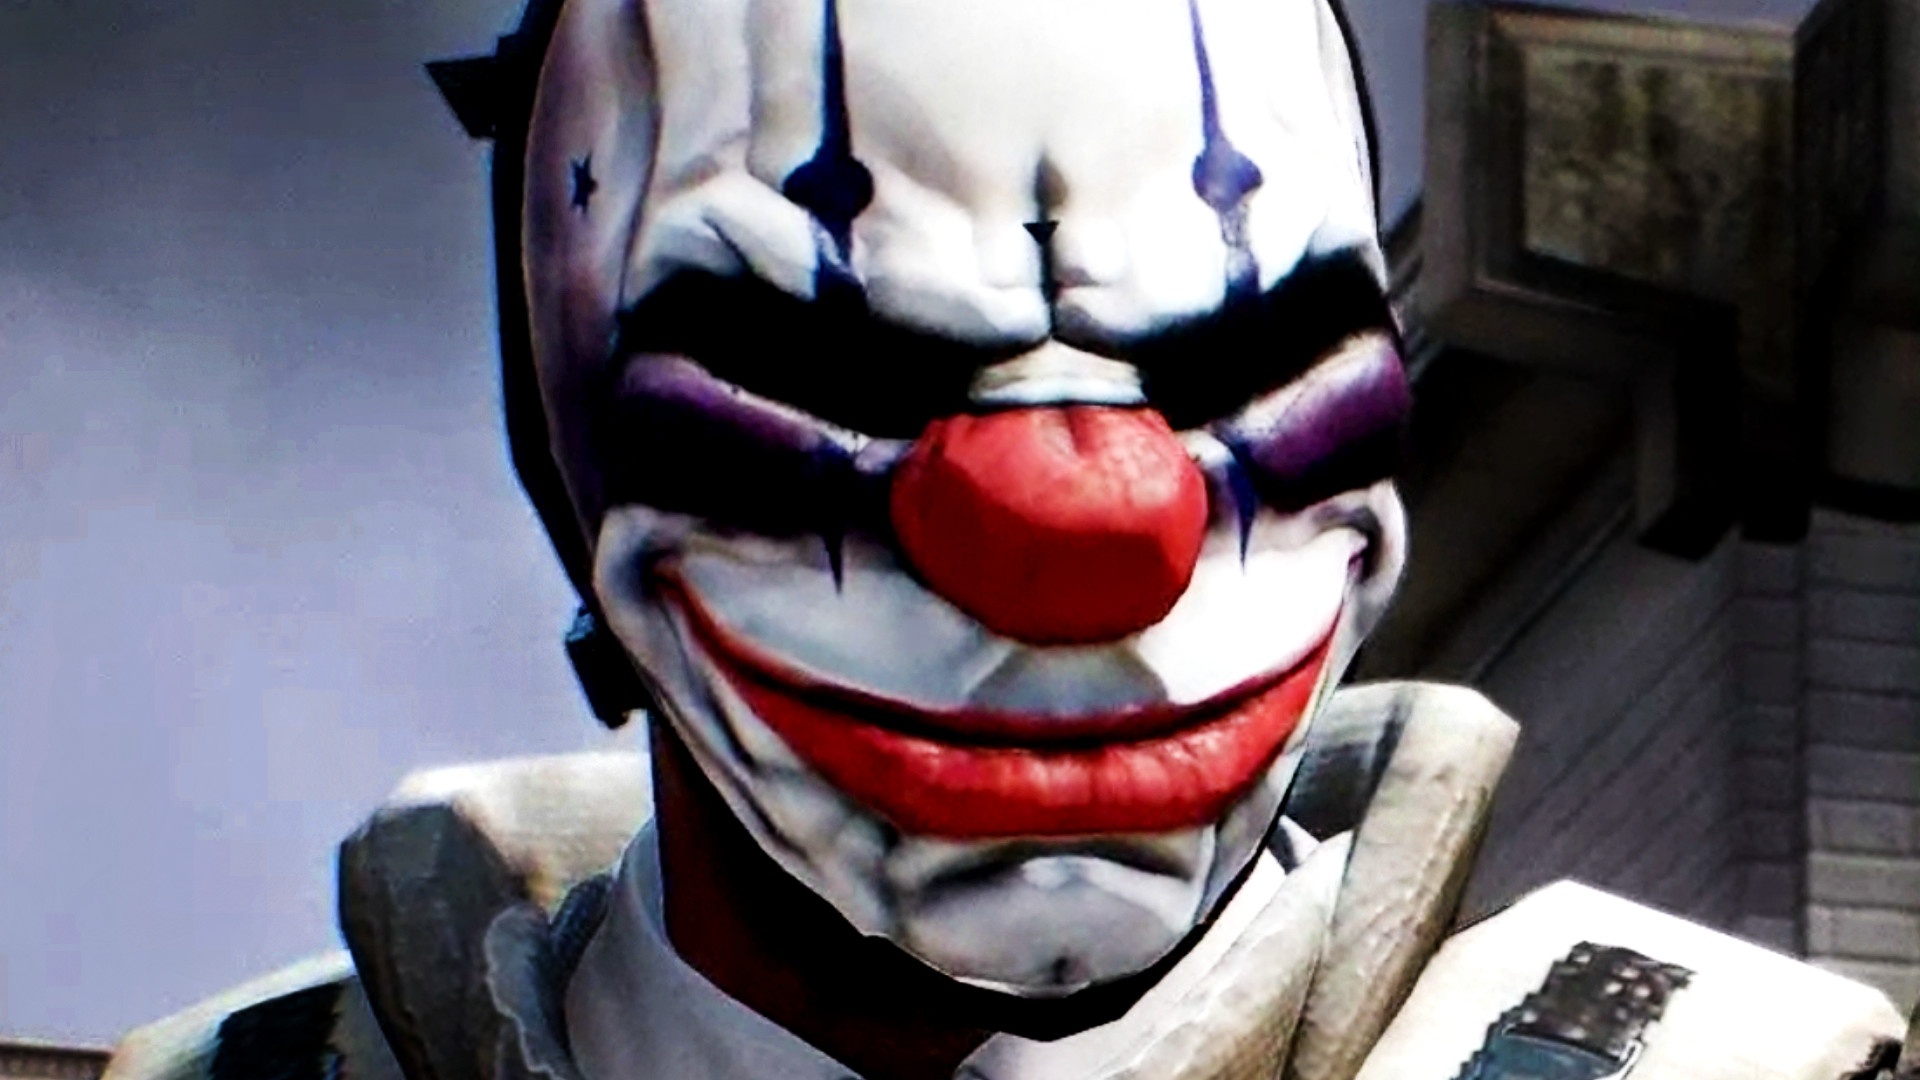 Payday 3's upcoming launch is set to be Starbreeze's biggest, CEO says